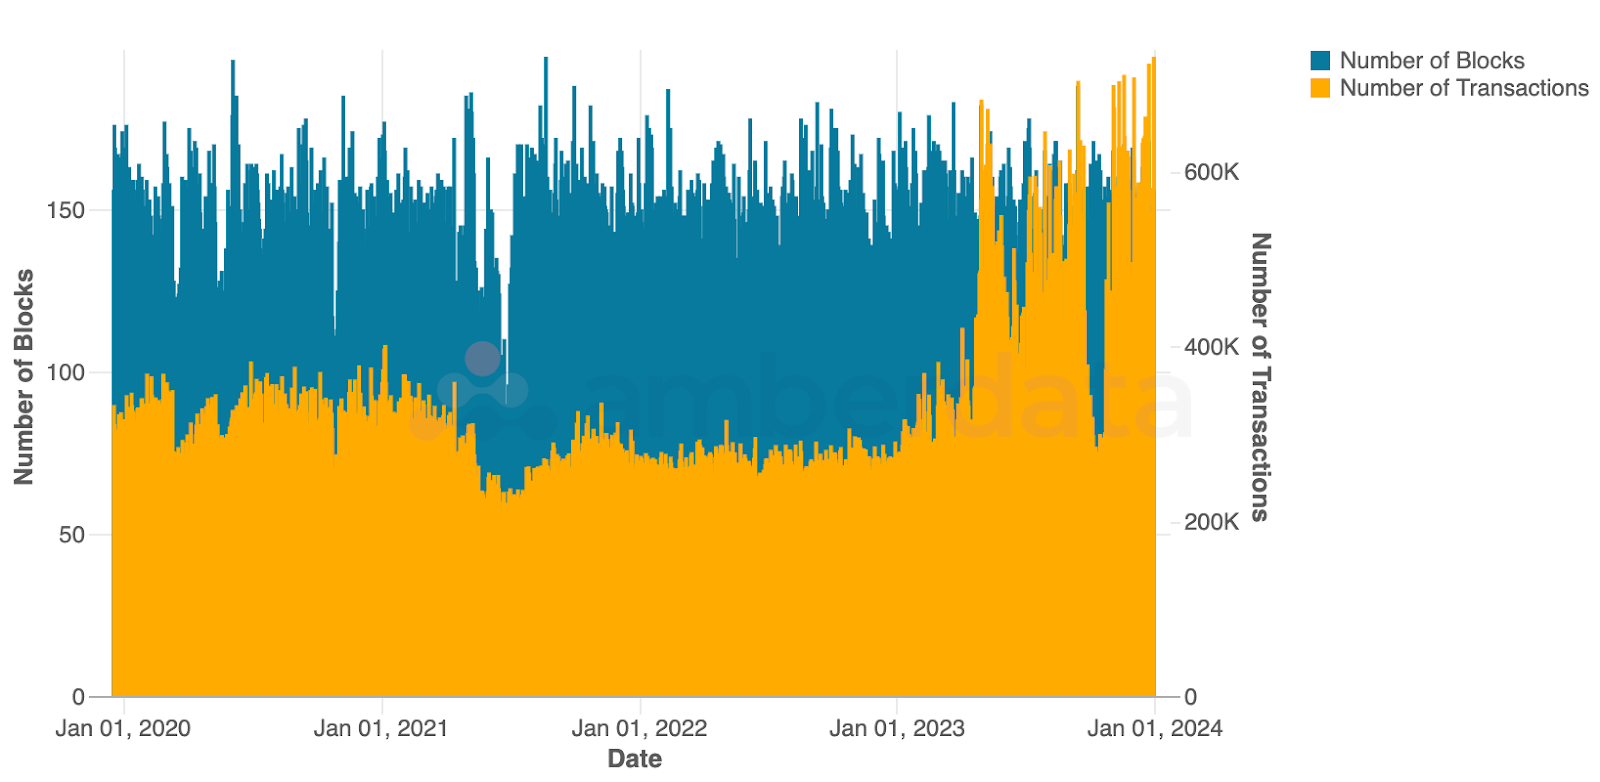 Amberdata API Bitcoin’s daily network block count and number of transactions since Jan 2020.